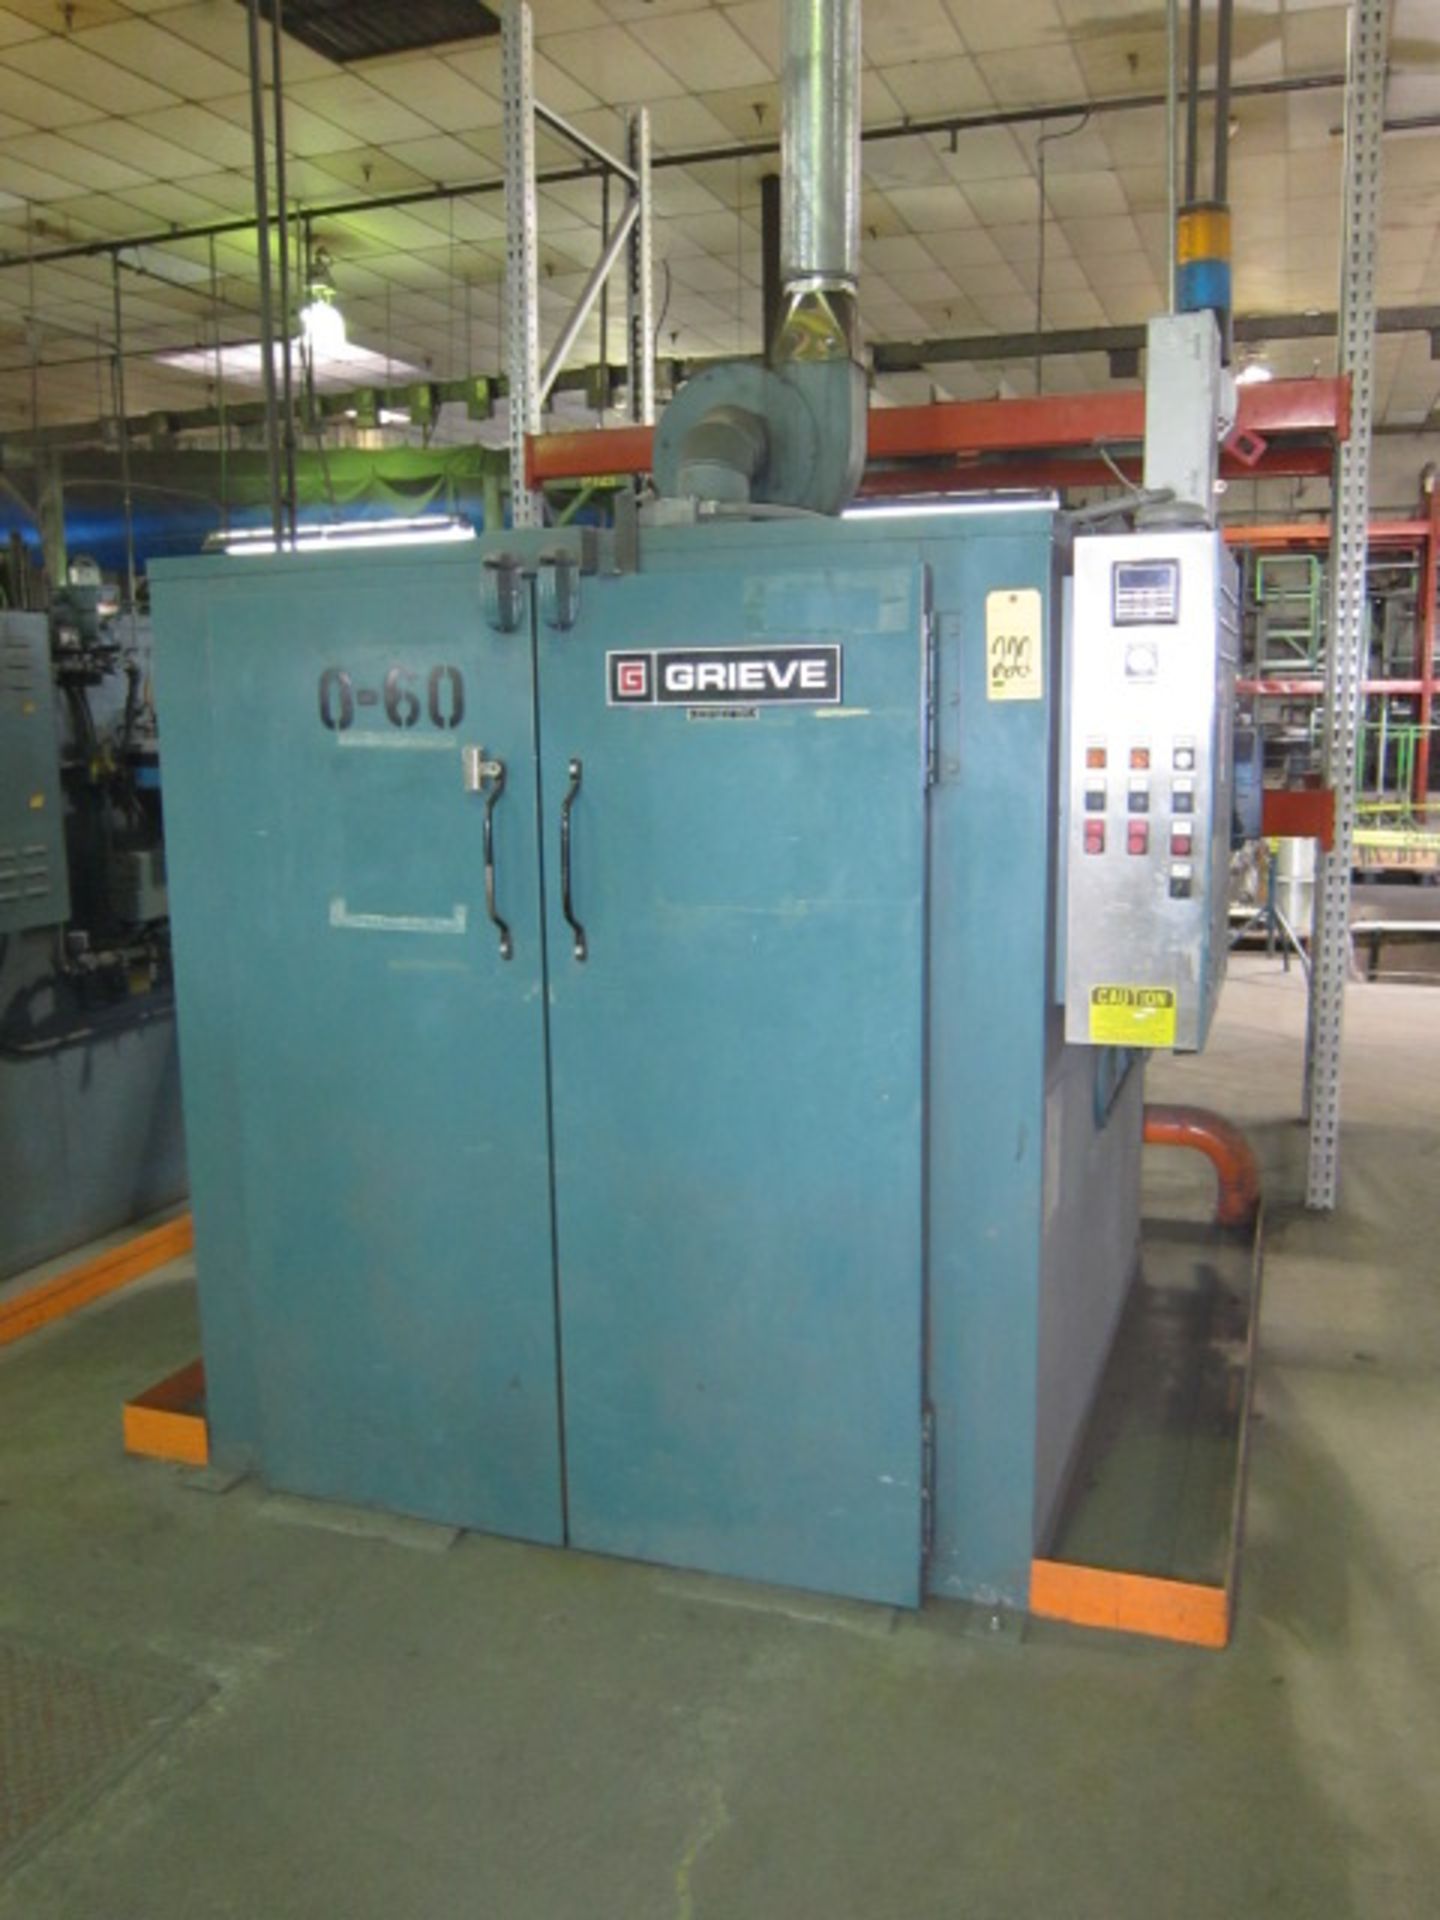 CABINET BAKE OVEN, GRIEVE MDL. TBH-500, 350 deg. F. max. temp., 2-door design, gas fired, S/N